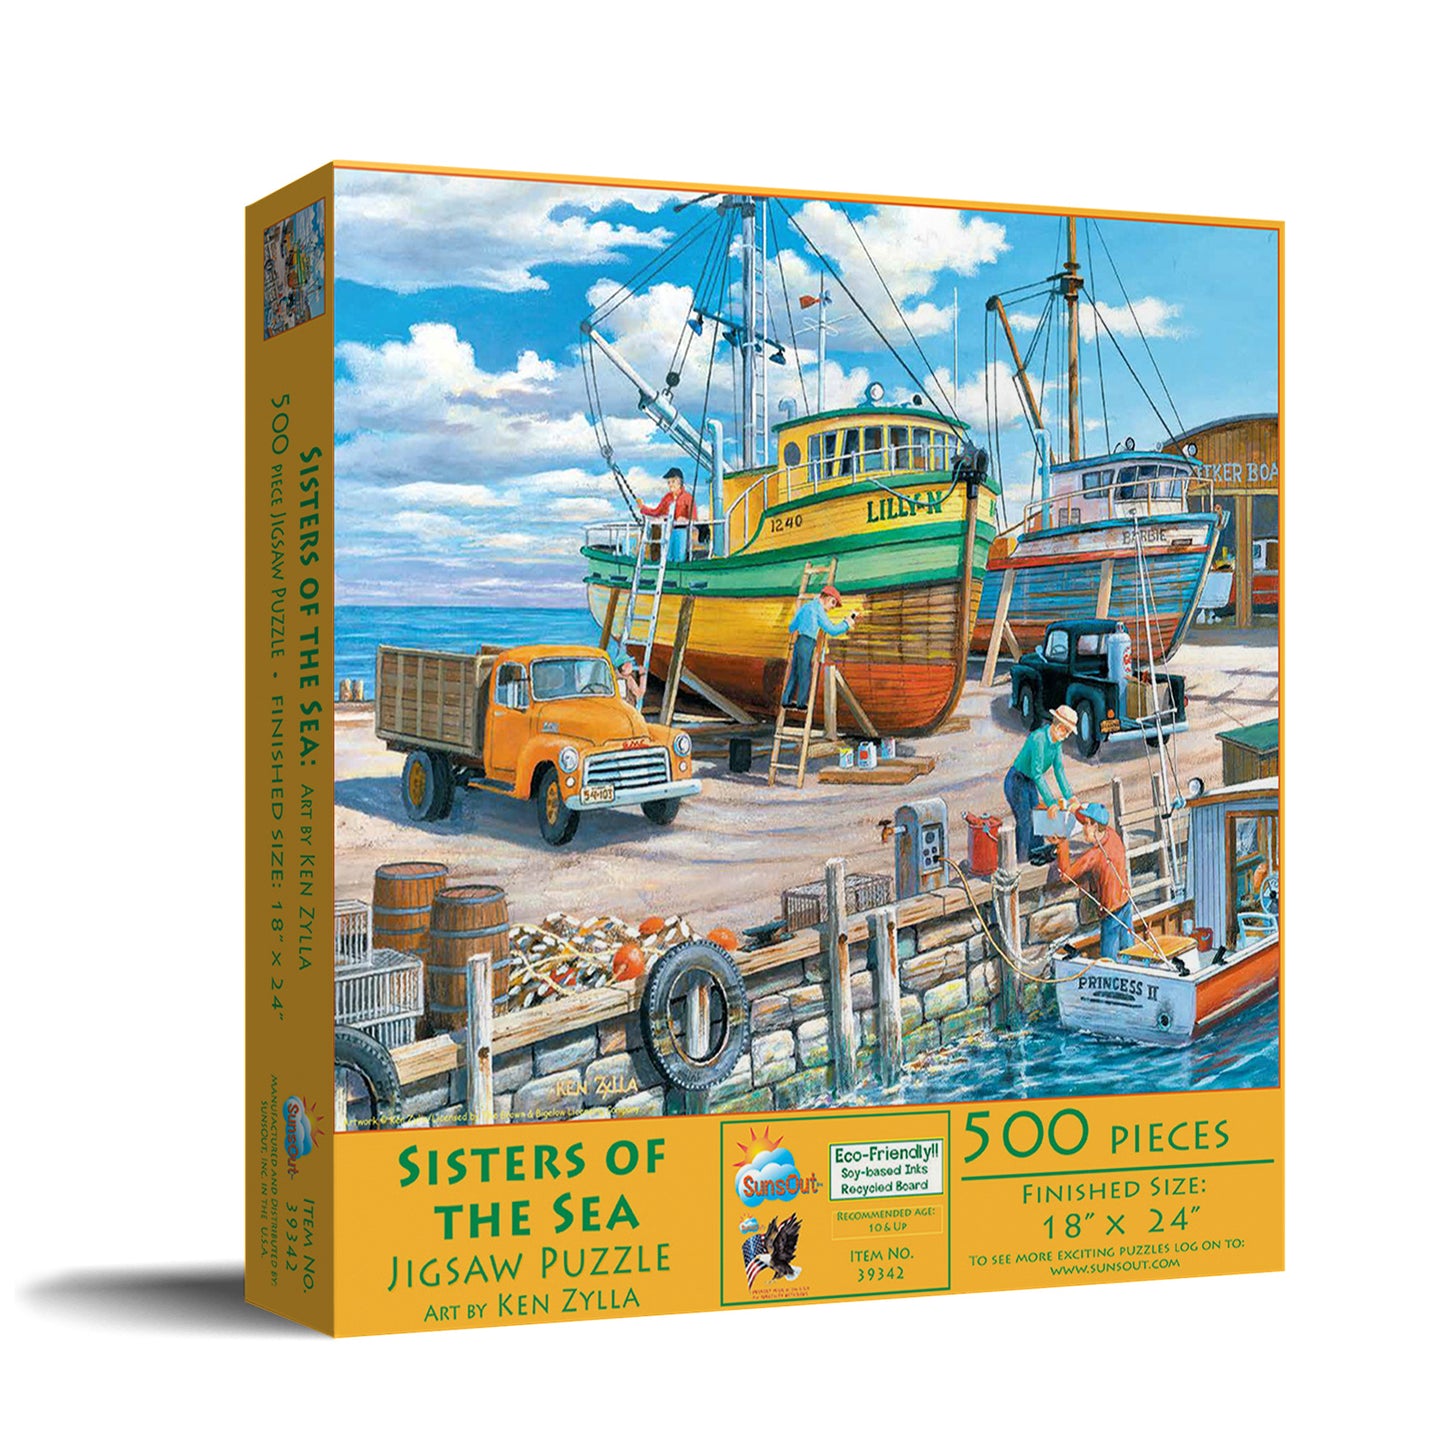 Sisters of the Sea - 500 Piece Jigsaw Puzzle